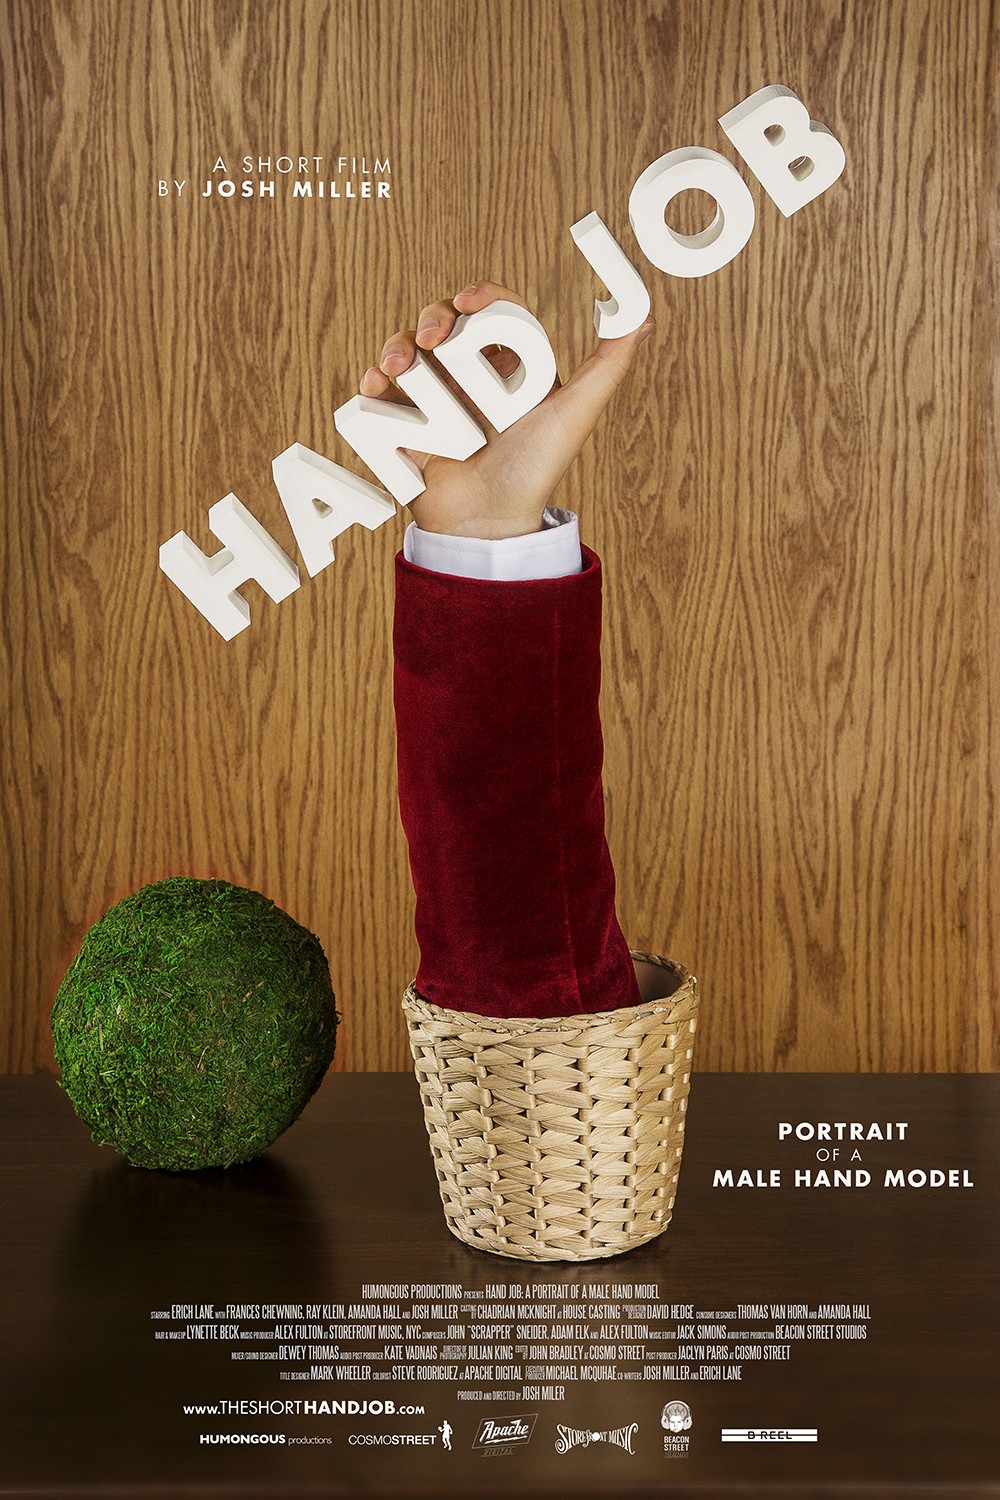 Extra Large Movie Poster Image for Hand Job: Portrait of a Male Hand Model